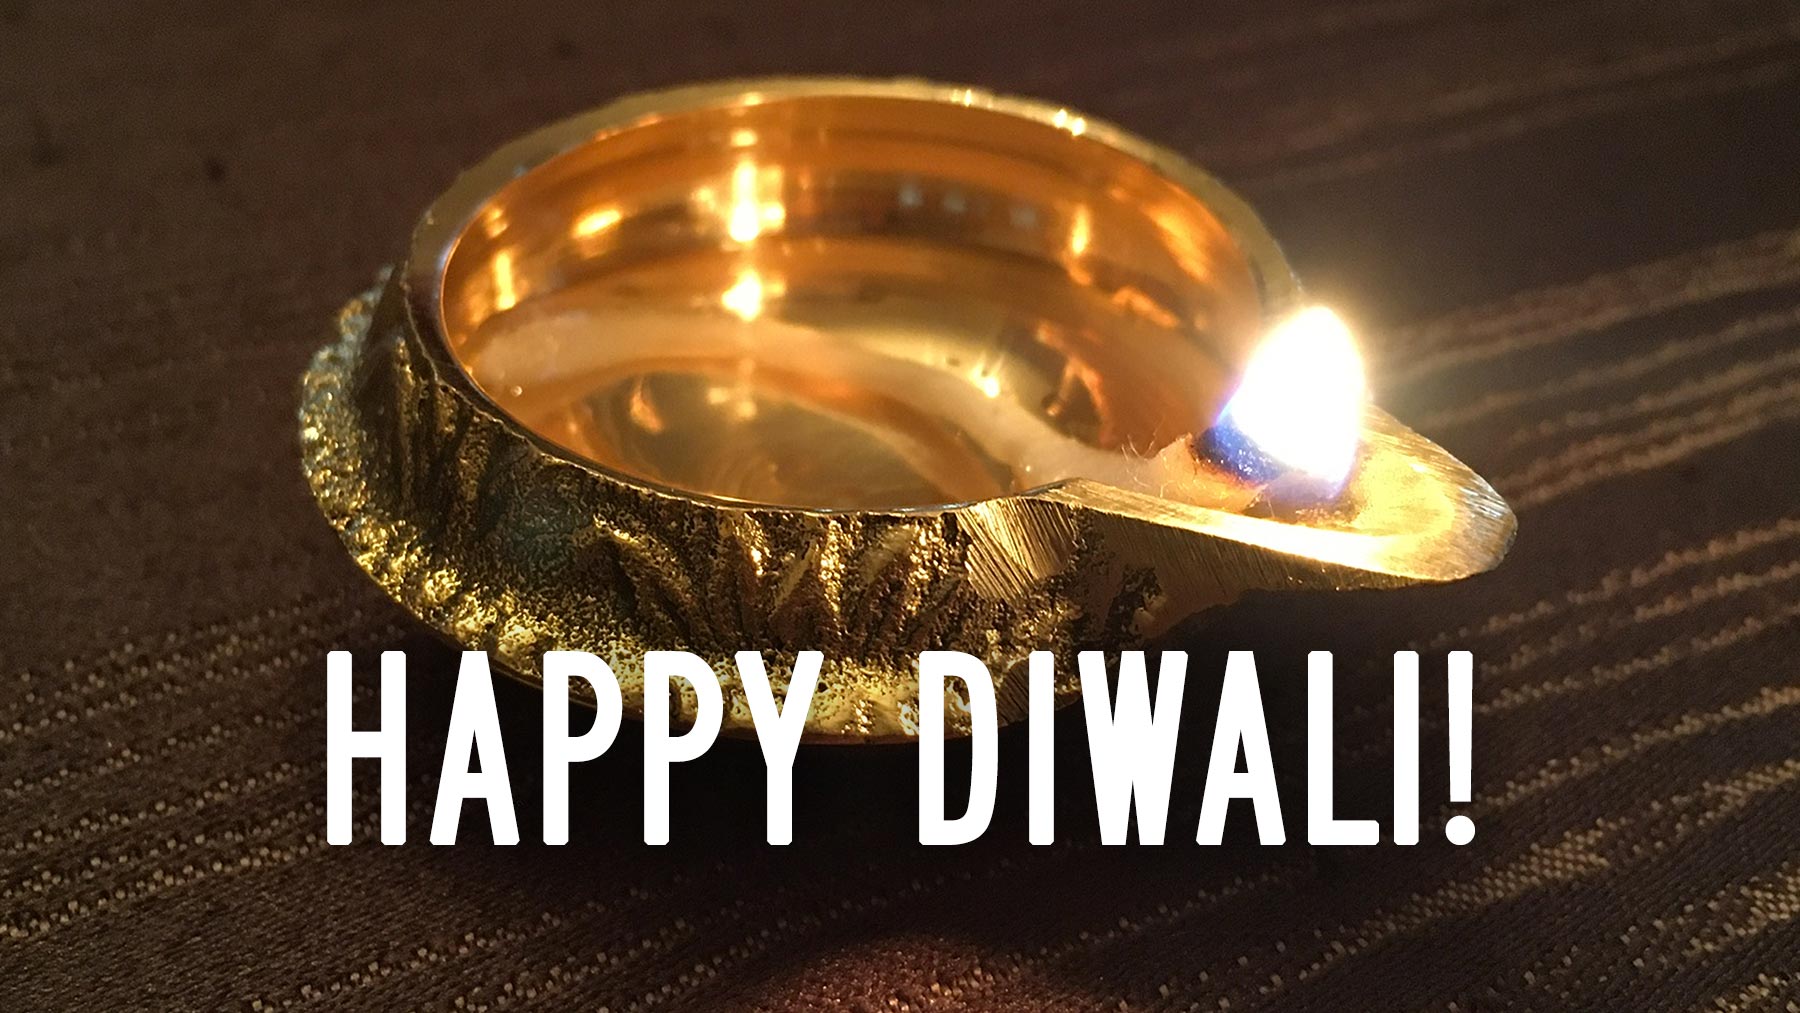 A lit diya (a small ceremonial oil lamp), with the words "Happy Diwali!"